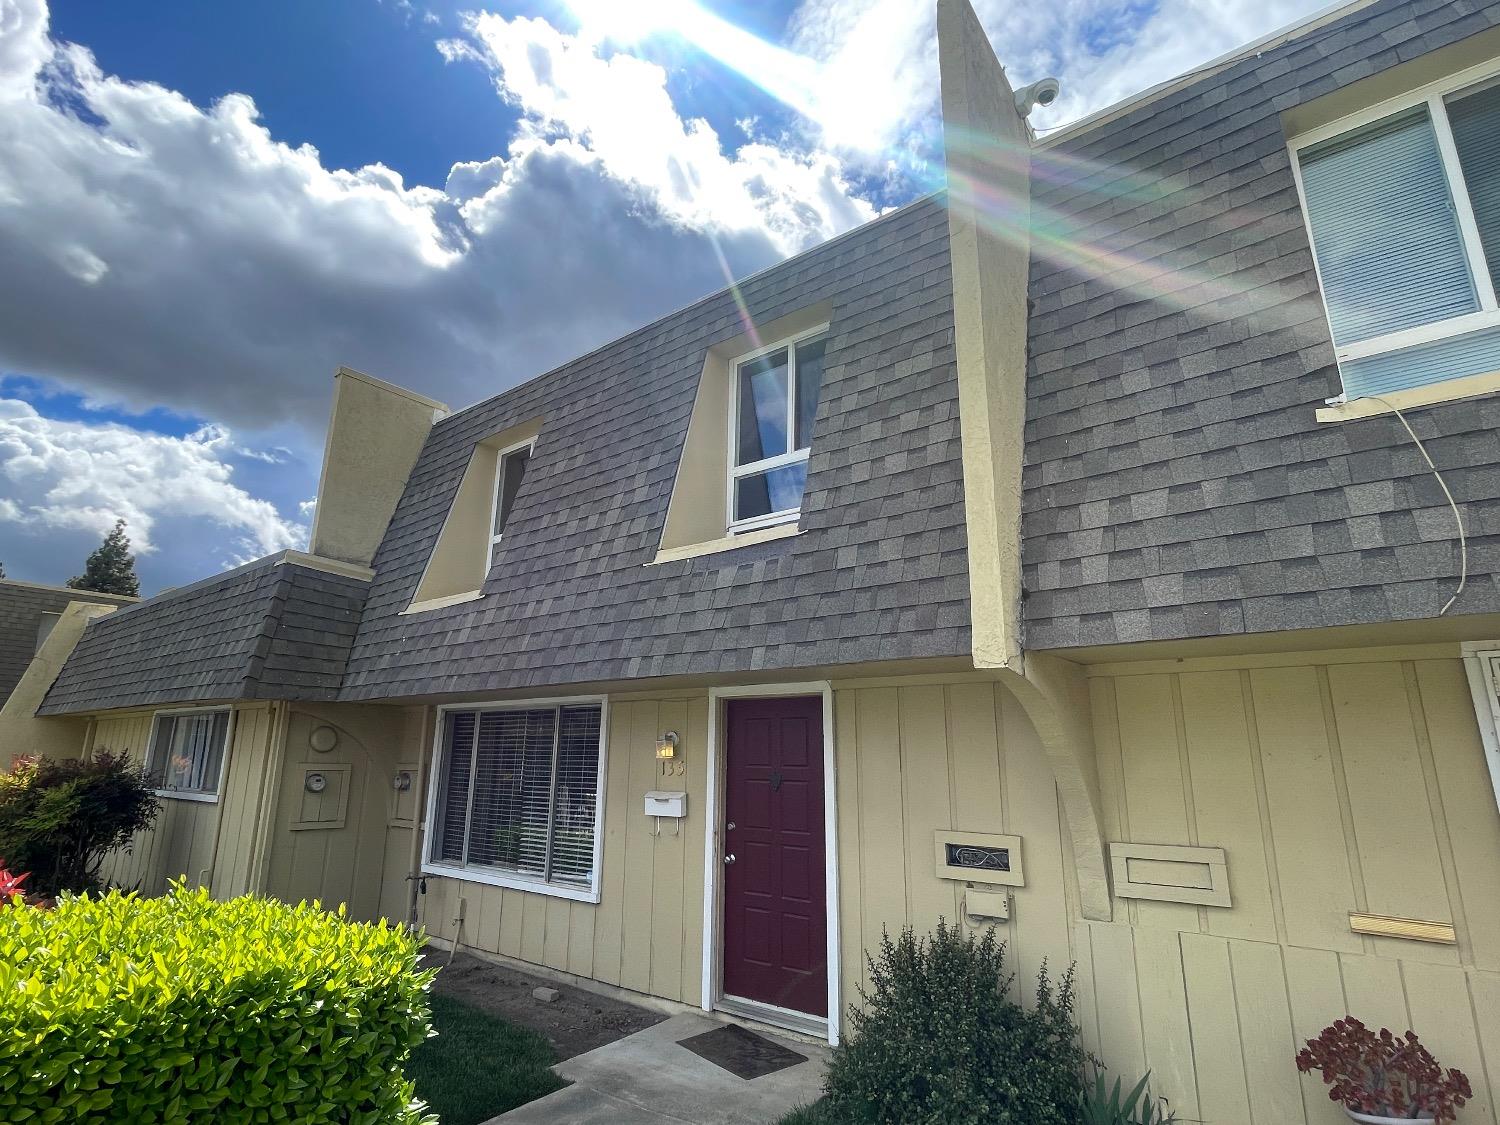 Photo of 740 W Lincoln Ave #135 in Woodland, CA